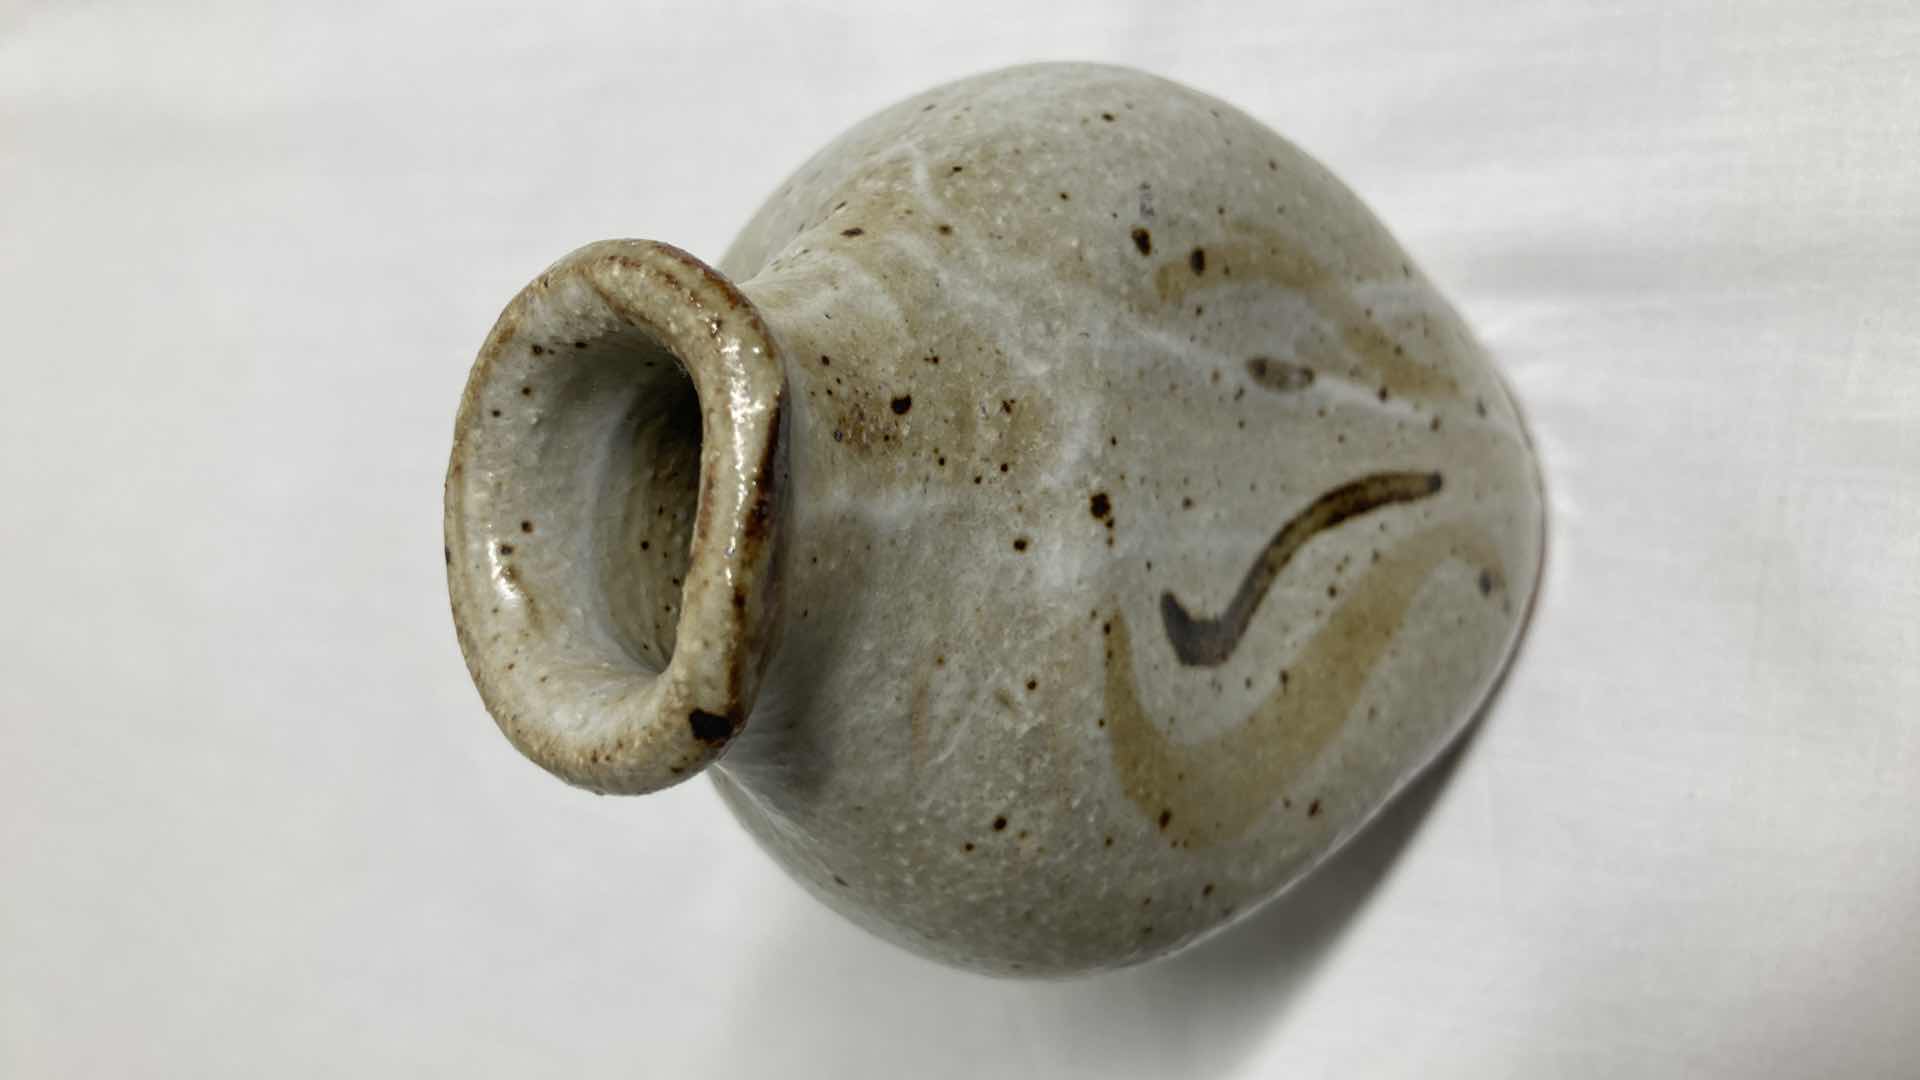 Photo 5 of DISTORTED EARTH TONE POTTERY 3.25” X 3” H5”